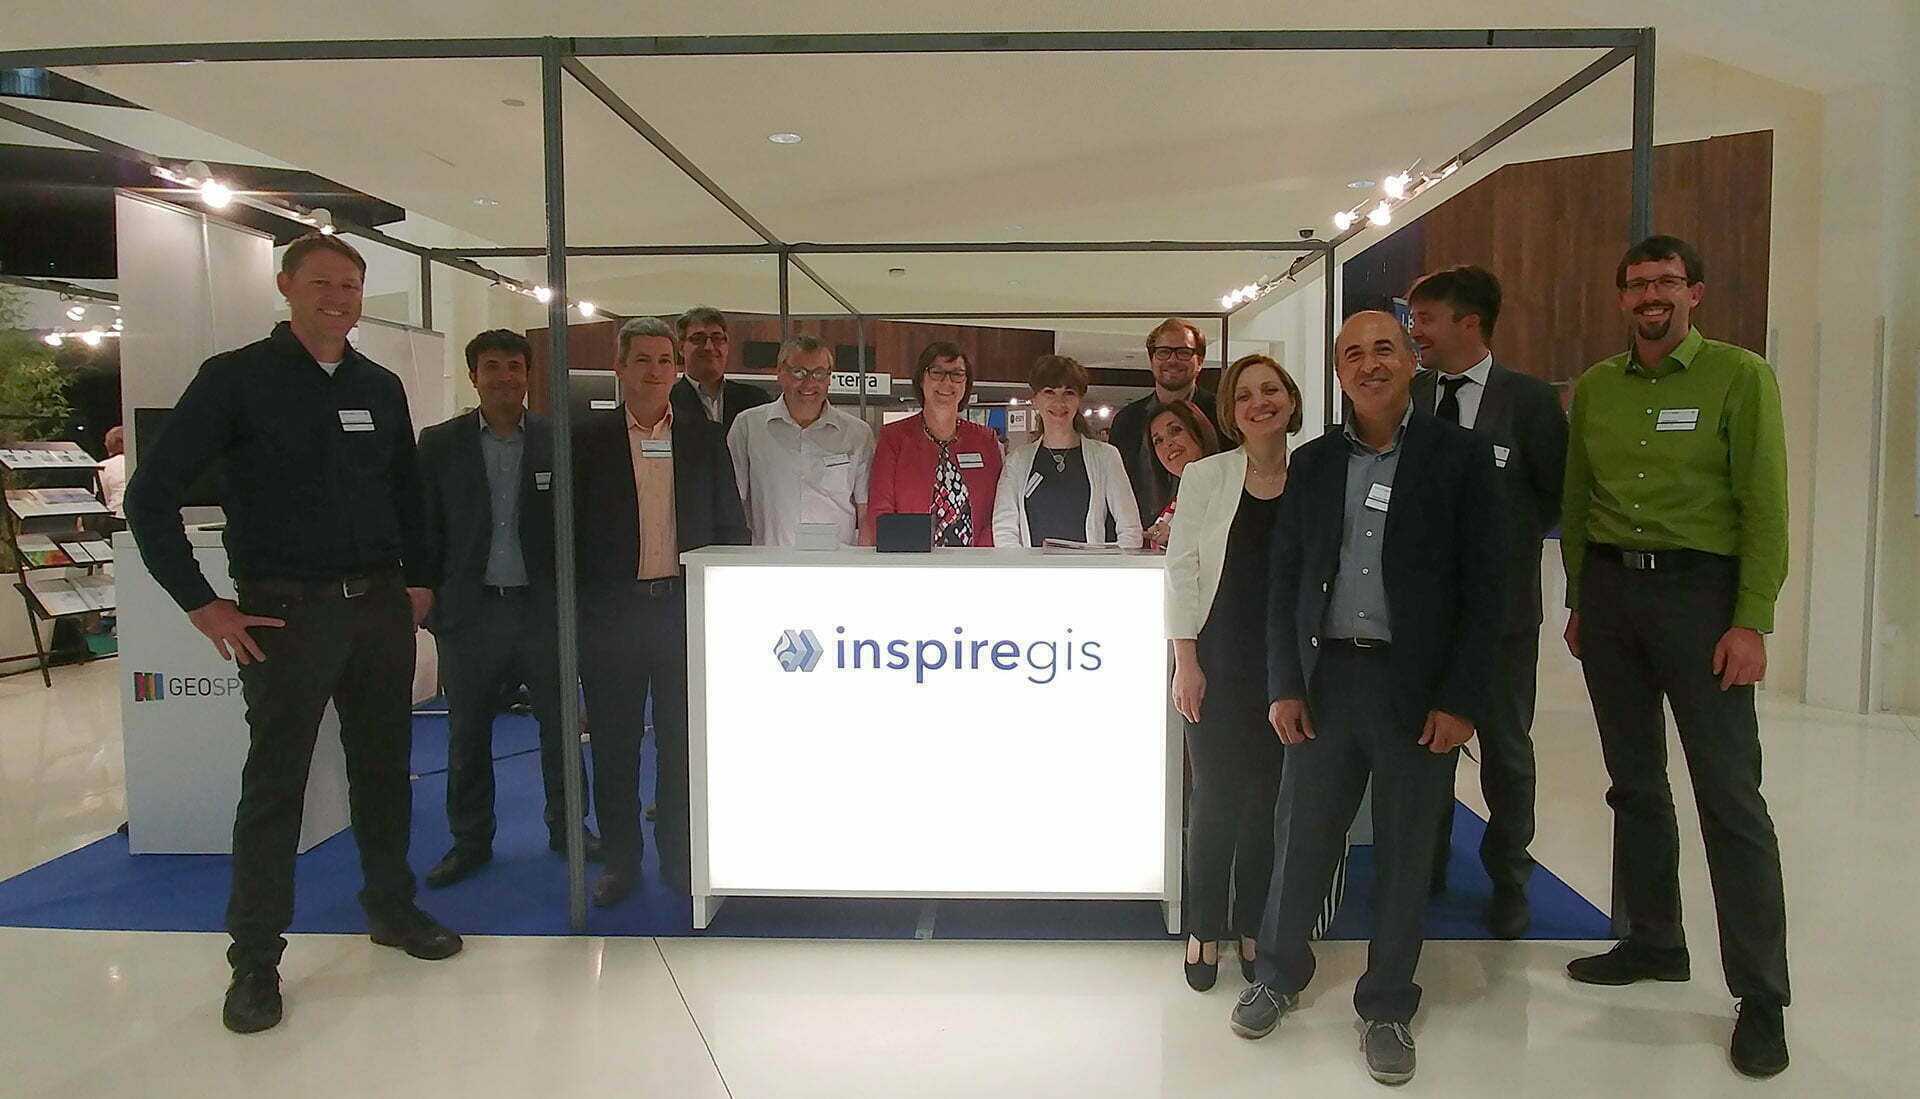 The INSPIRE GIS partners at our joint booth, together with some JRC staff